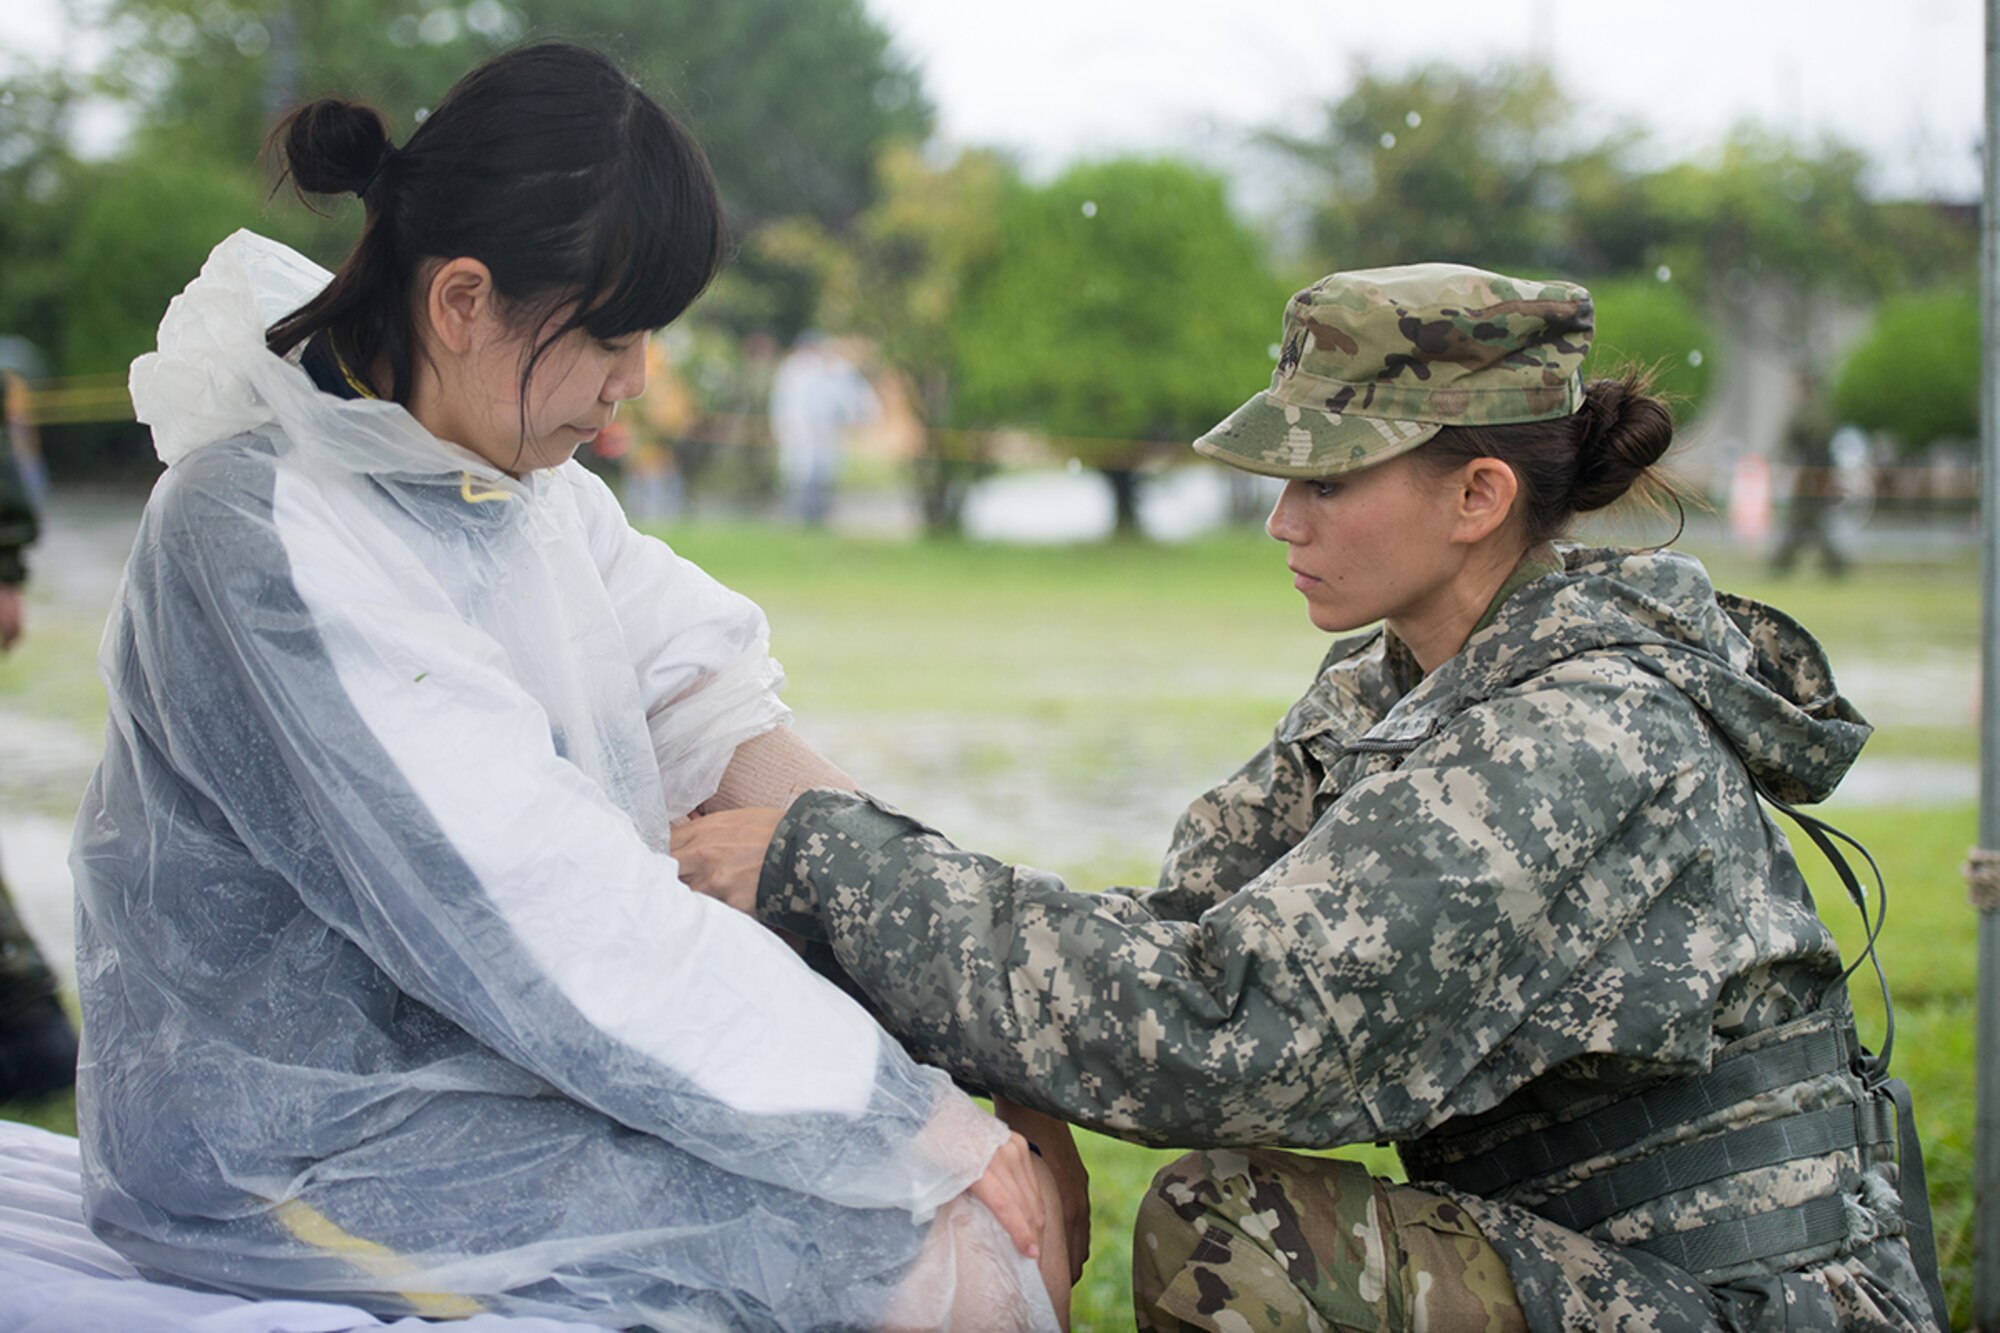 Army Sgt. Marlise Muenzer, 94th Combat Support Hospital medic, administers care to a simulated patient during the Kanagawa Prefecture Government Joint Disaster Drill of at Japan Ground Self-Defense Force Camp Takeyama, Japan, Sept. 11, 2016. The exercise provided an opportunity for U.S. Armed Forces members to strengthen partnerships with Japan Self-Defense Forces. (U.S. Air Force photo by Senior Airman Delano Scott/Released)